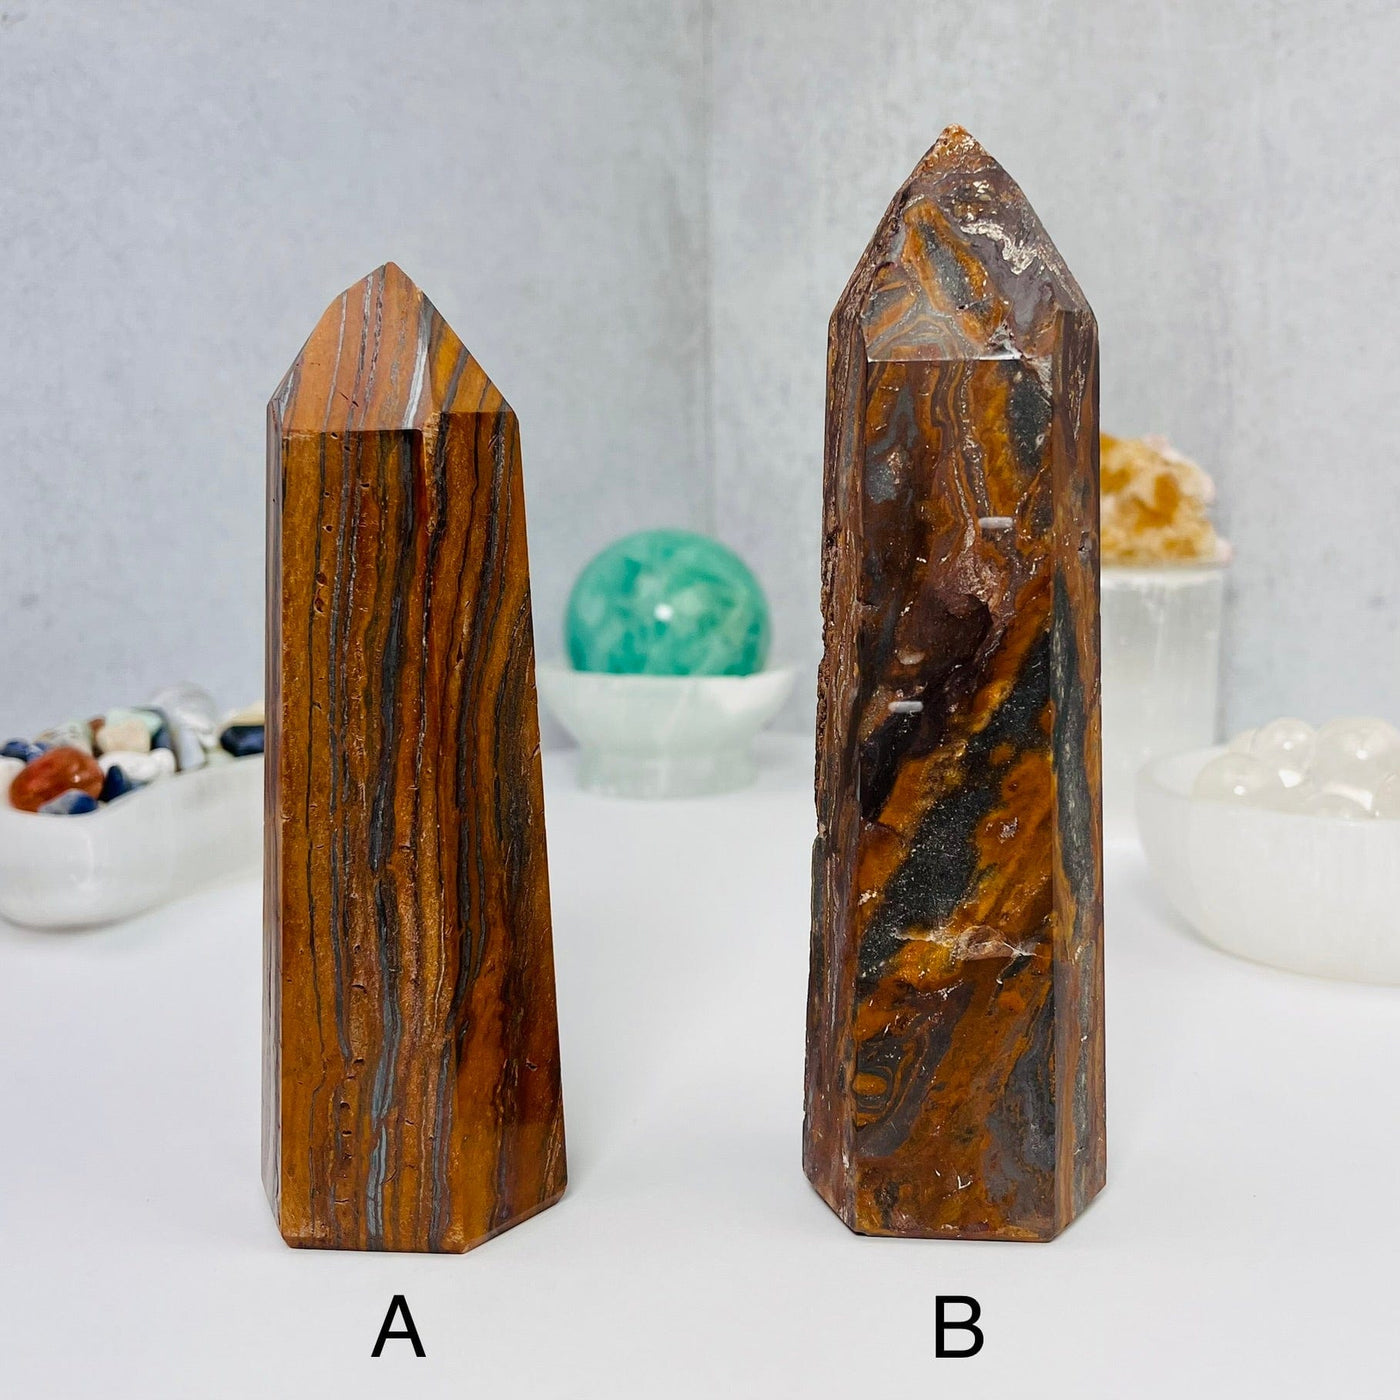 Tigers Eye Towers, options A and B placed side by side on a white surface.